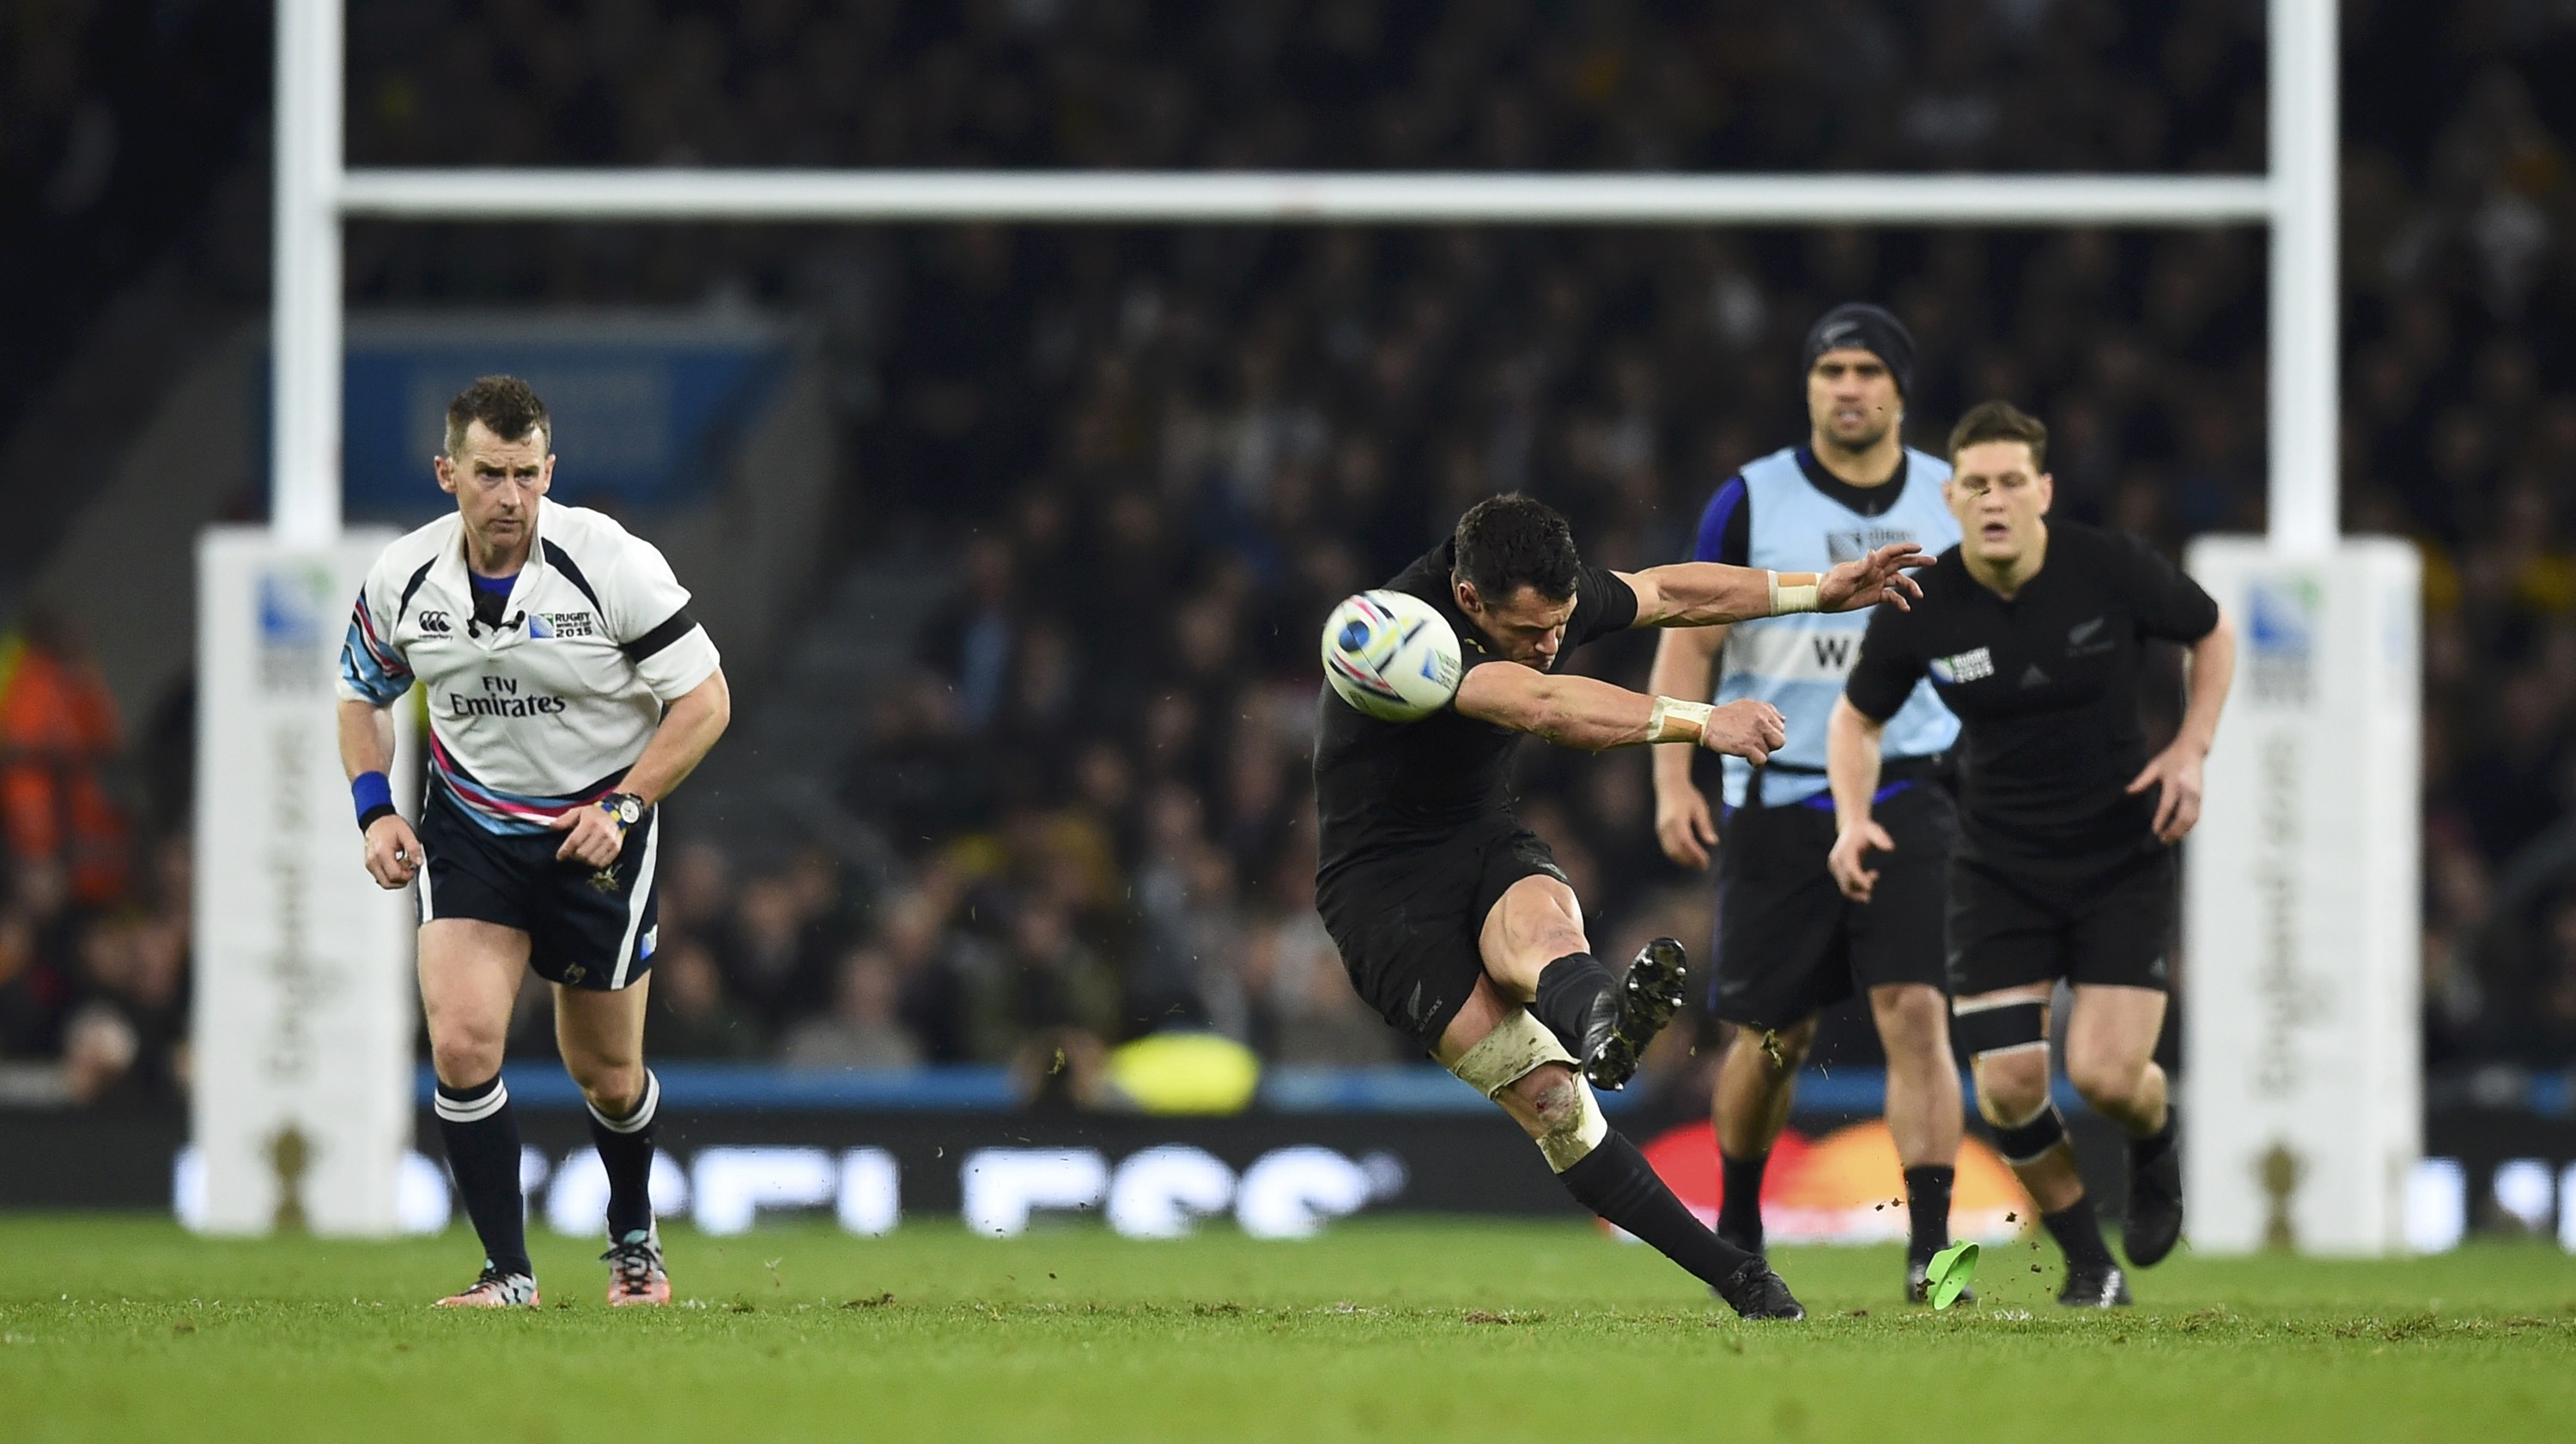 Dan Carter of New Zealand (R) kicks the ball during their Rugby World Cup final match against Australia at Twickenham in London, Britain, October 31, 2015. REUTERS/Dylan Martinez